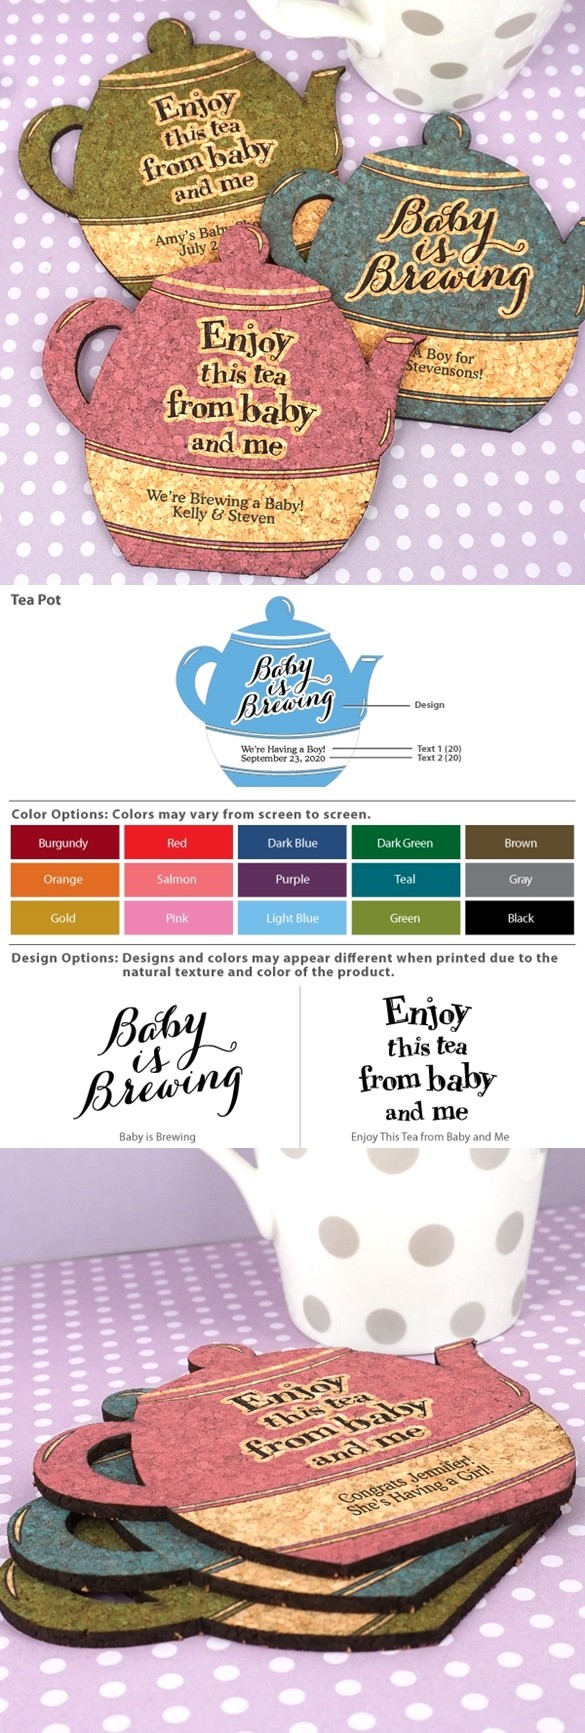 Personalized Baby Shower Tea Pot-Shaped Cork Coasters (15 Colors)